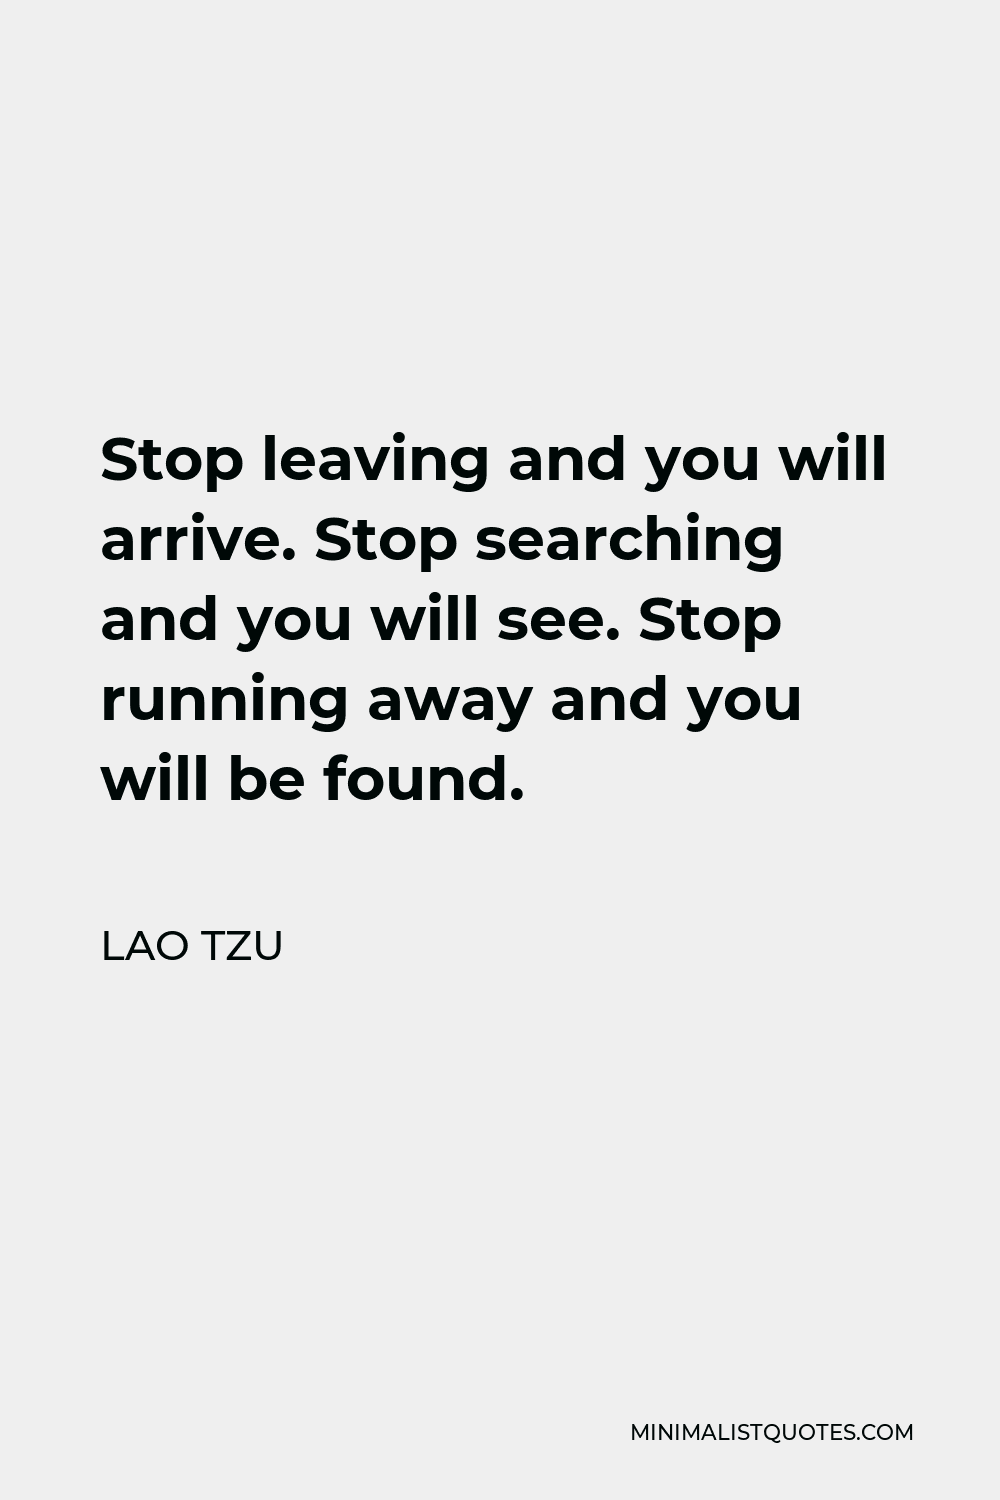 Lao Tzu Quote: Stop leaving and you will arrive. Stop searching and you ...